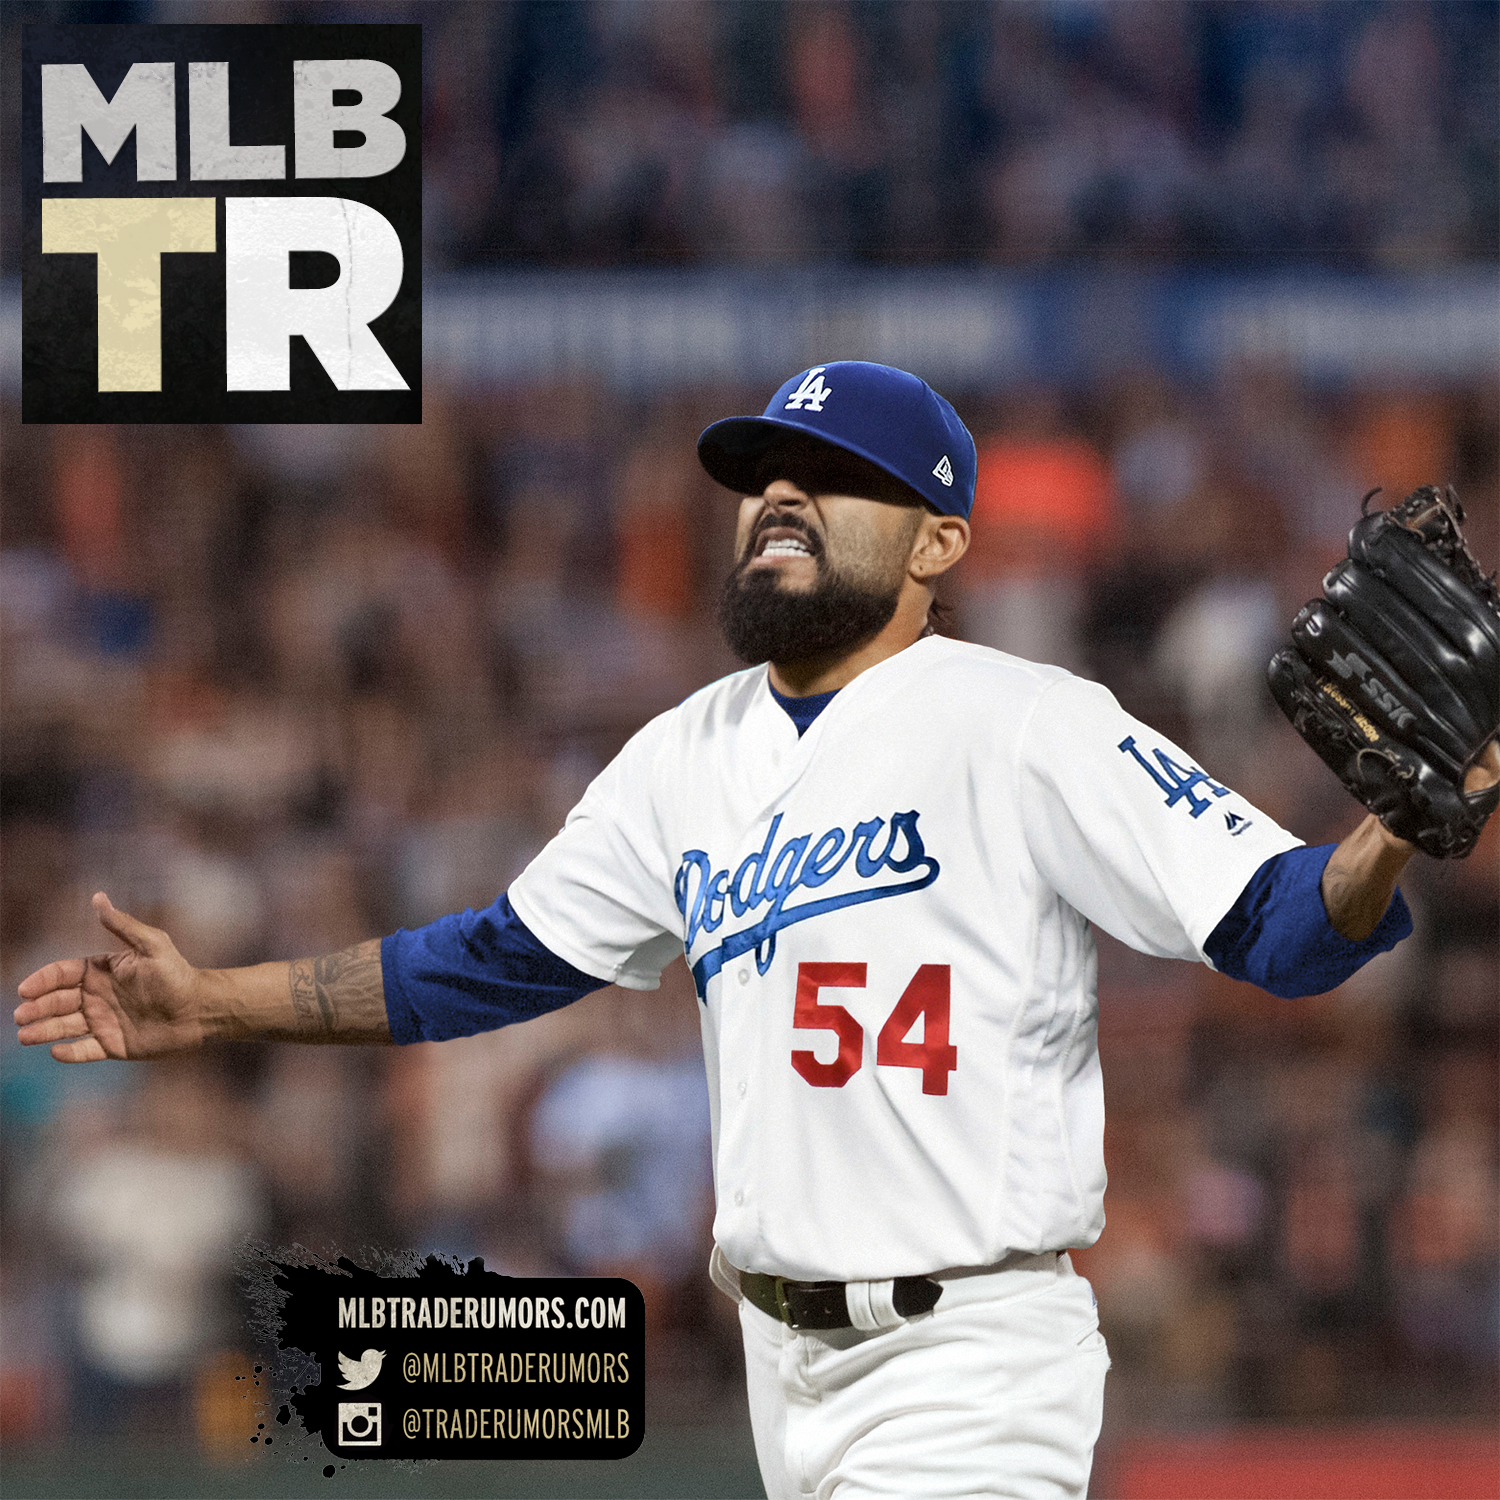 Ex-Giants reliever Sergio Romo has 'pretty awesome feeling' about